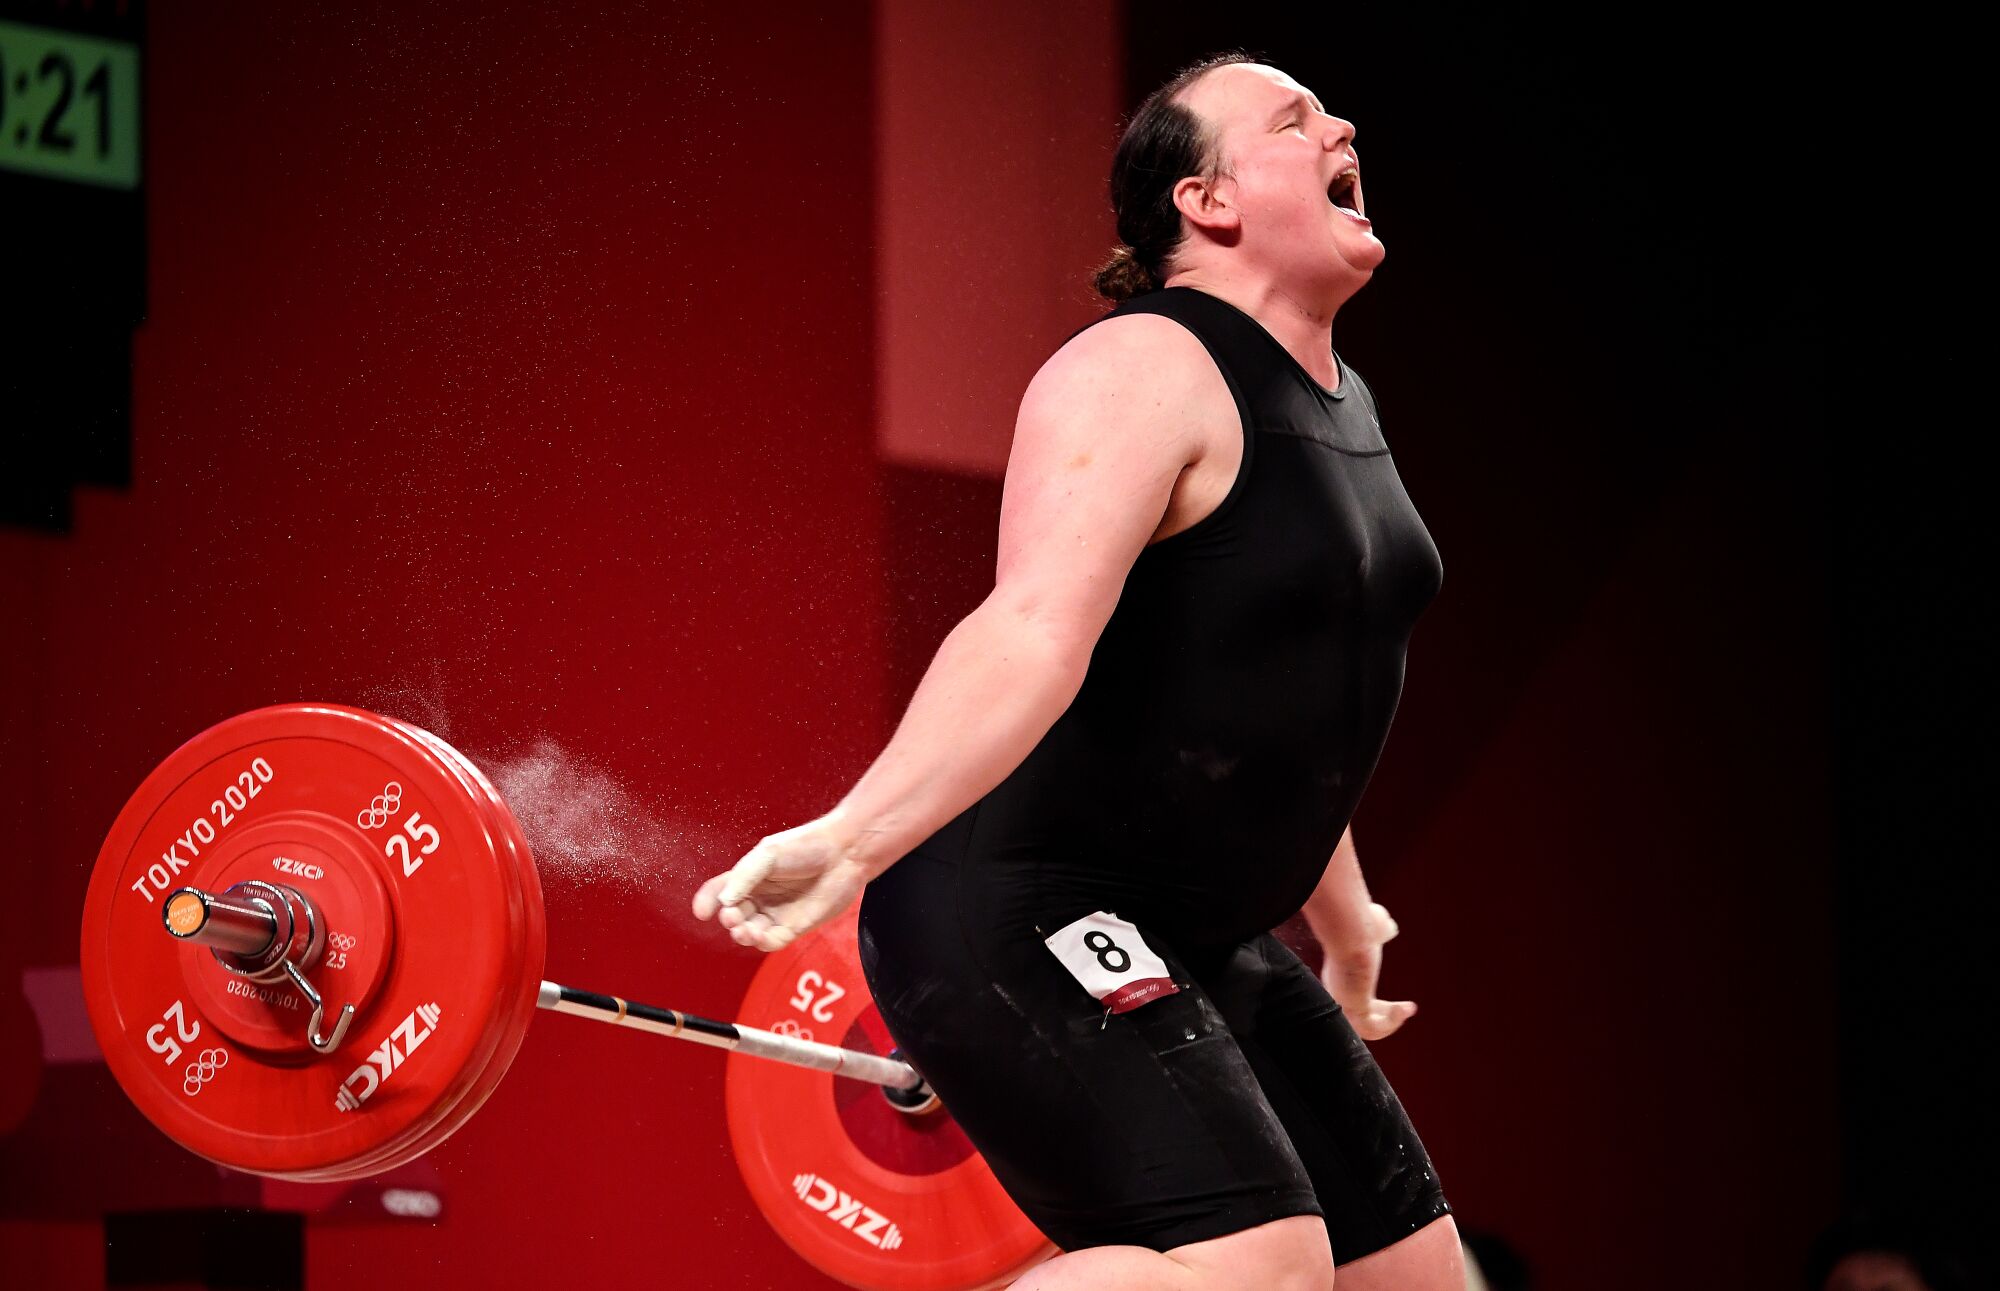 New Zealand's Laurel Hubbard competes in the women's +87kg weightlifting final.